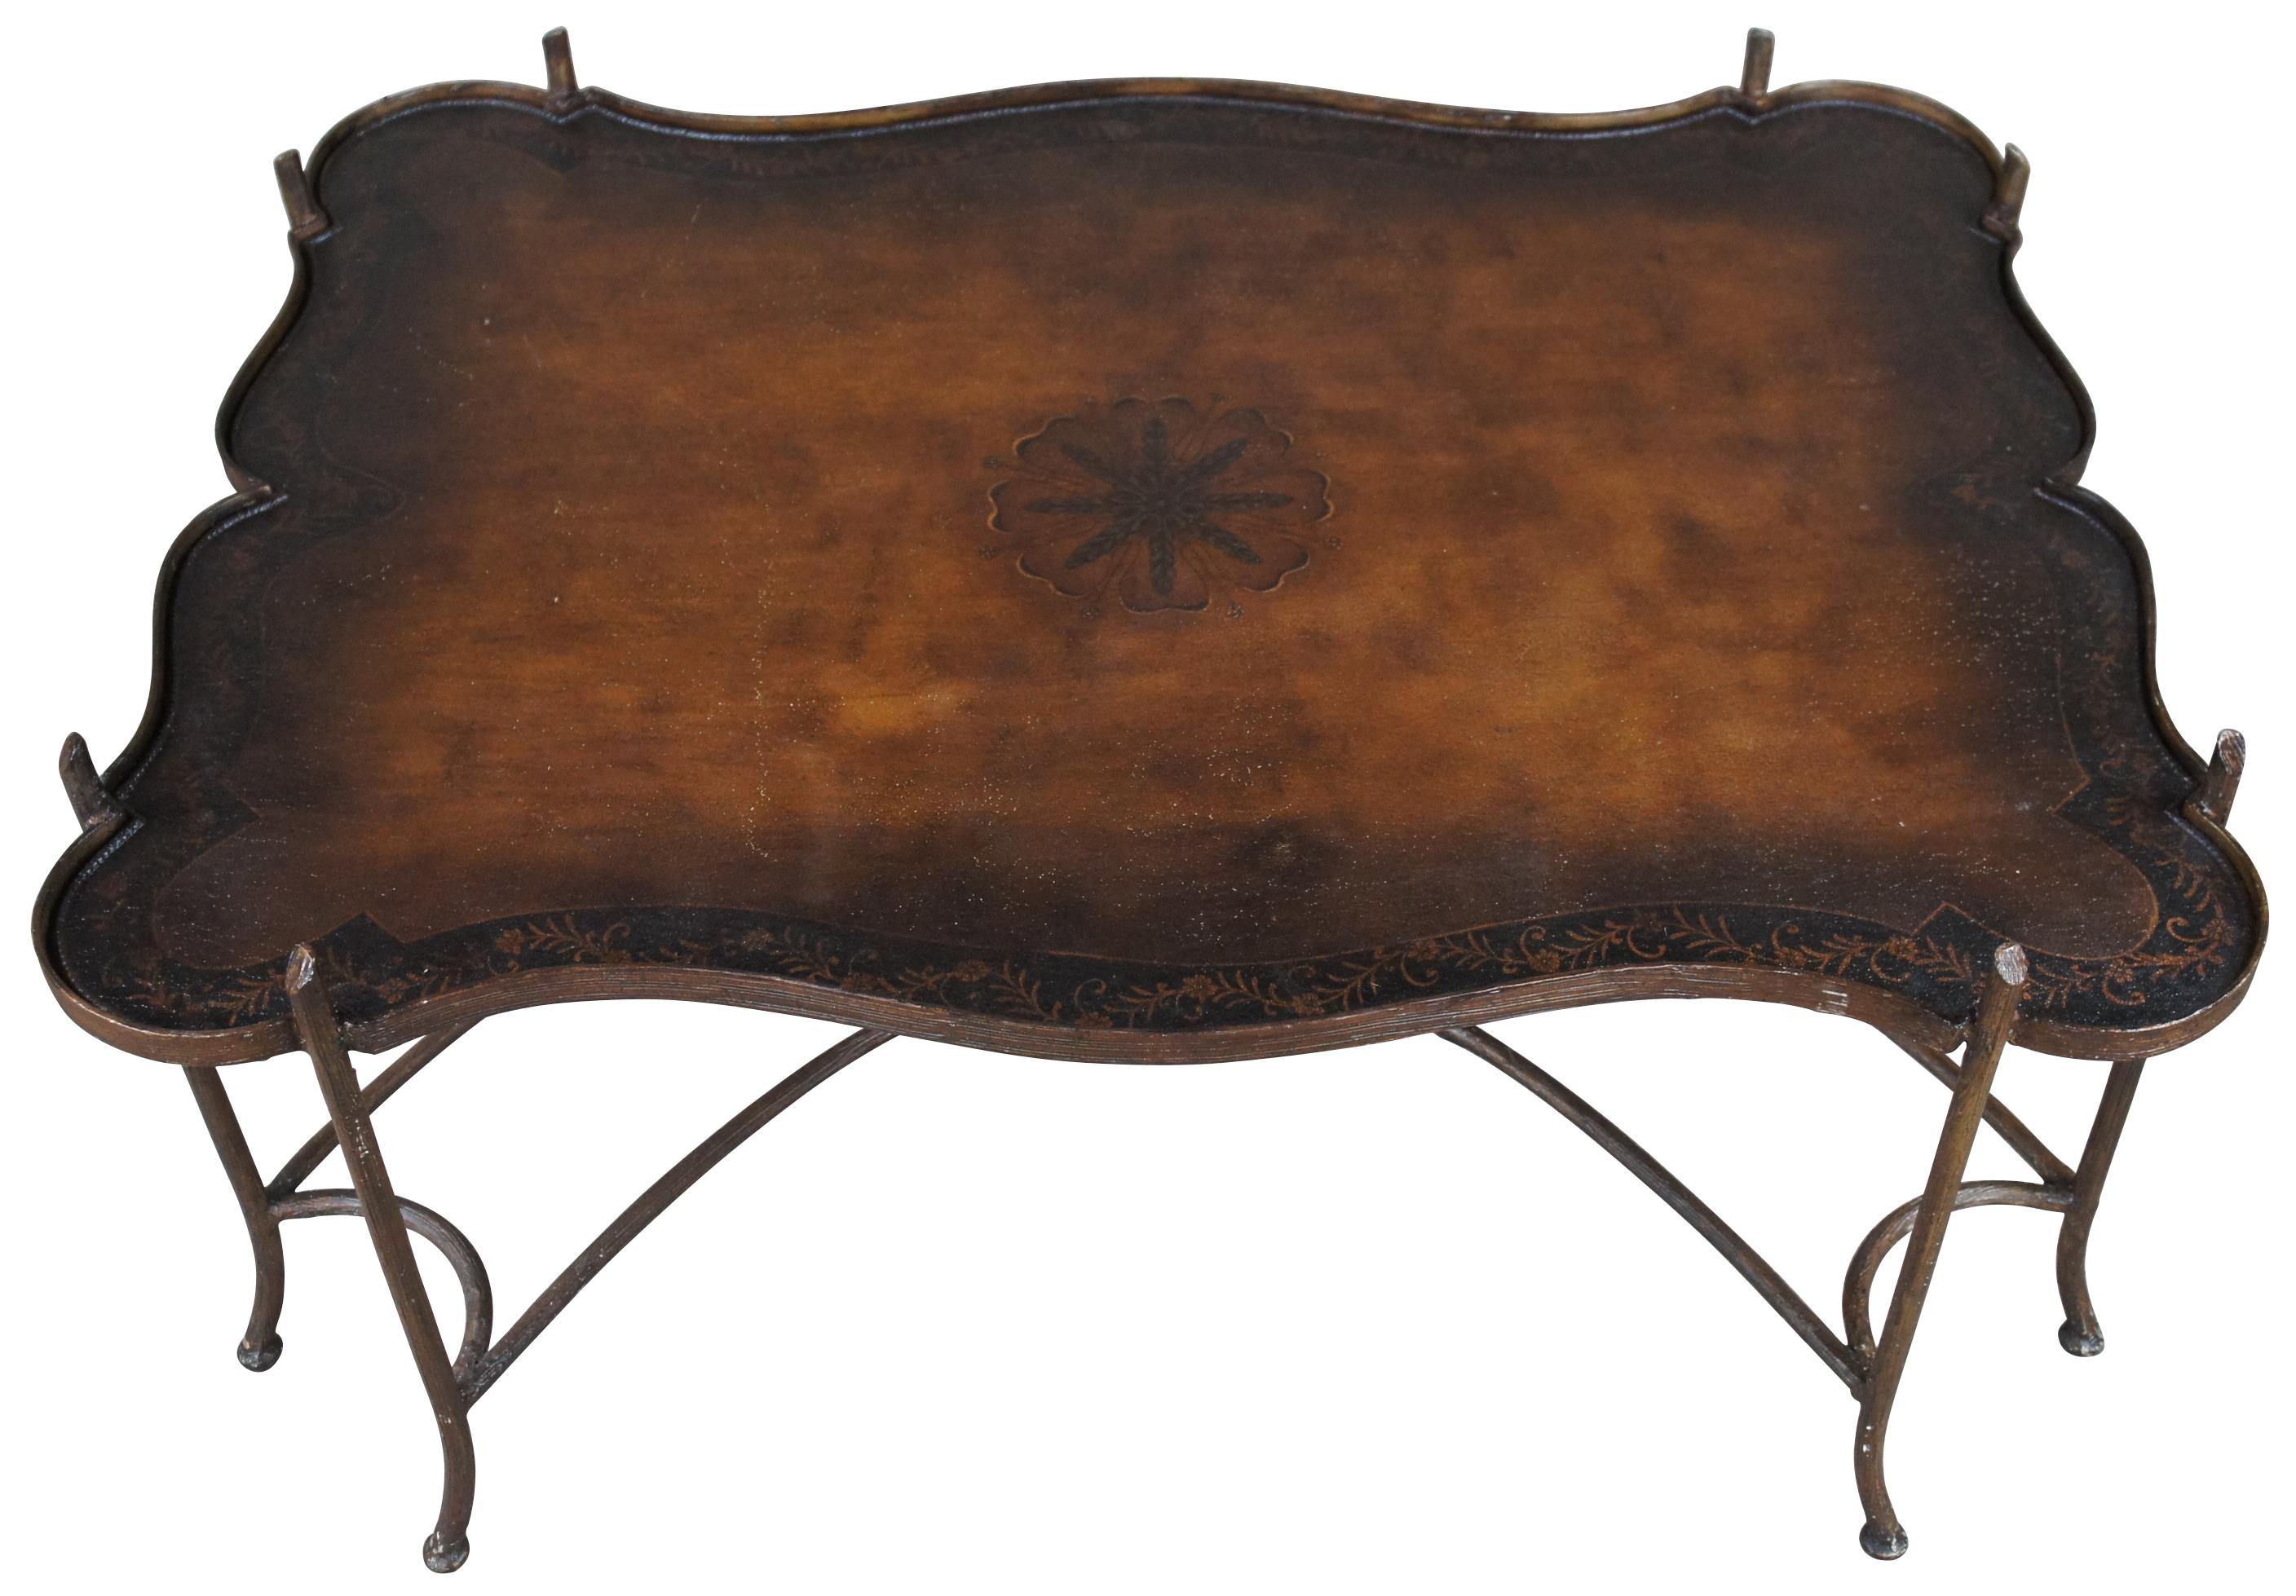 Gorgeous Maitland-Smith gilded faux bois iron coffee table in chinoiserie or Hollywood Regency style with tole painted metal tray style top, circa 1990.

This stunning gilt iron faux bois coffee table features a double curved x-base, double corner